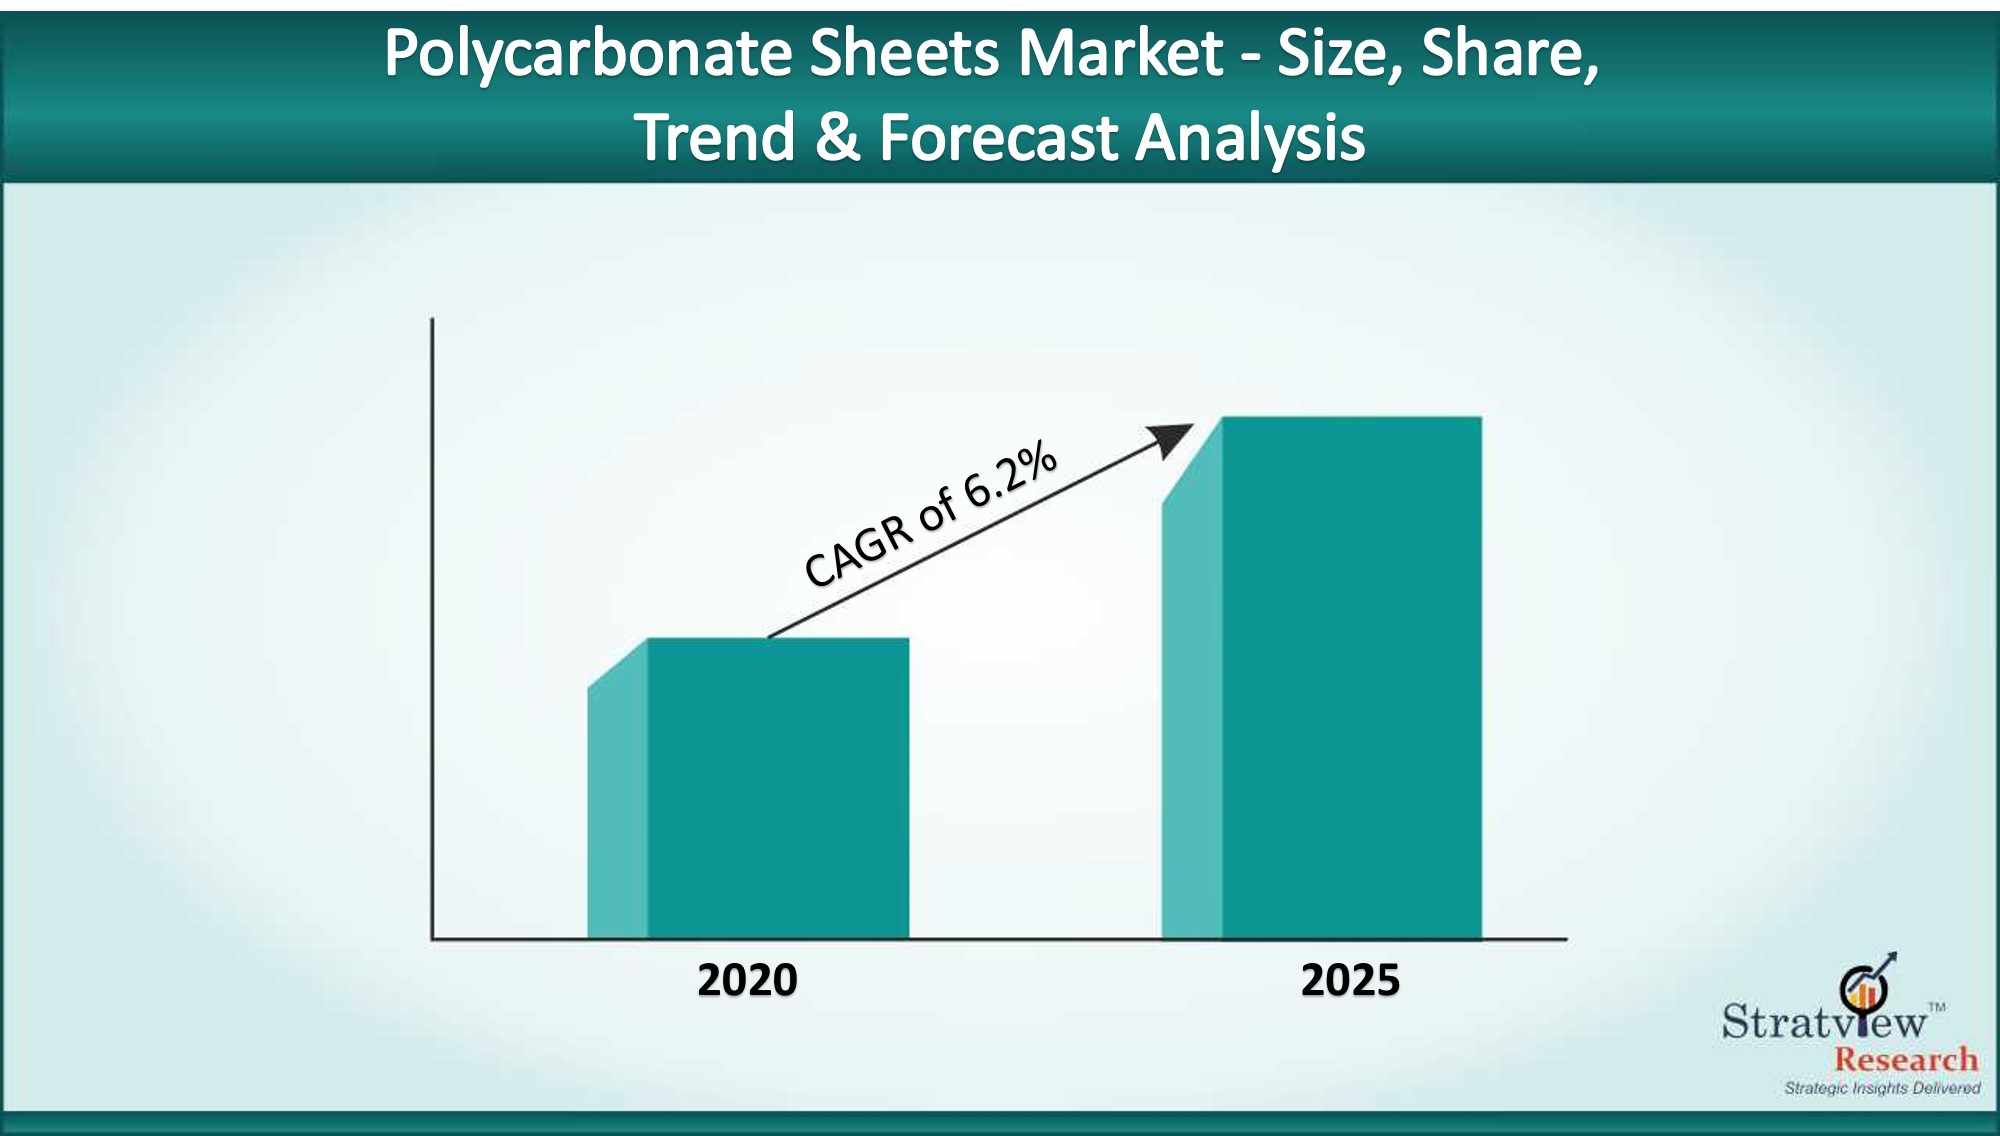 Polycarbonate Sheets Market to experience an impressive growth of 6.2% during 2020-2025